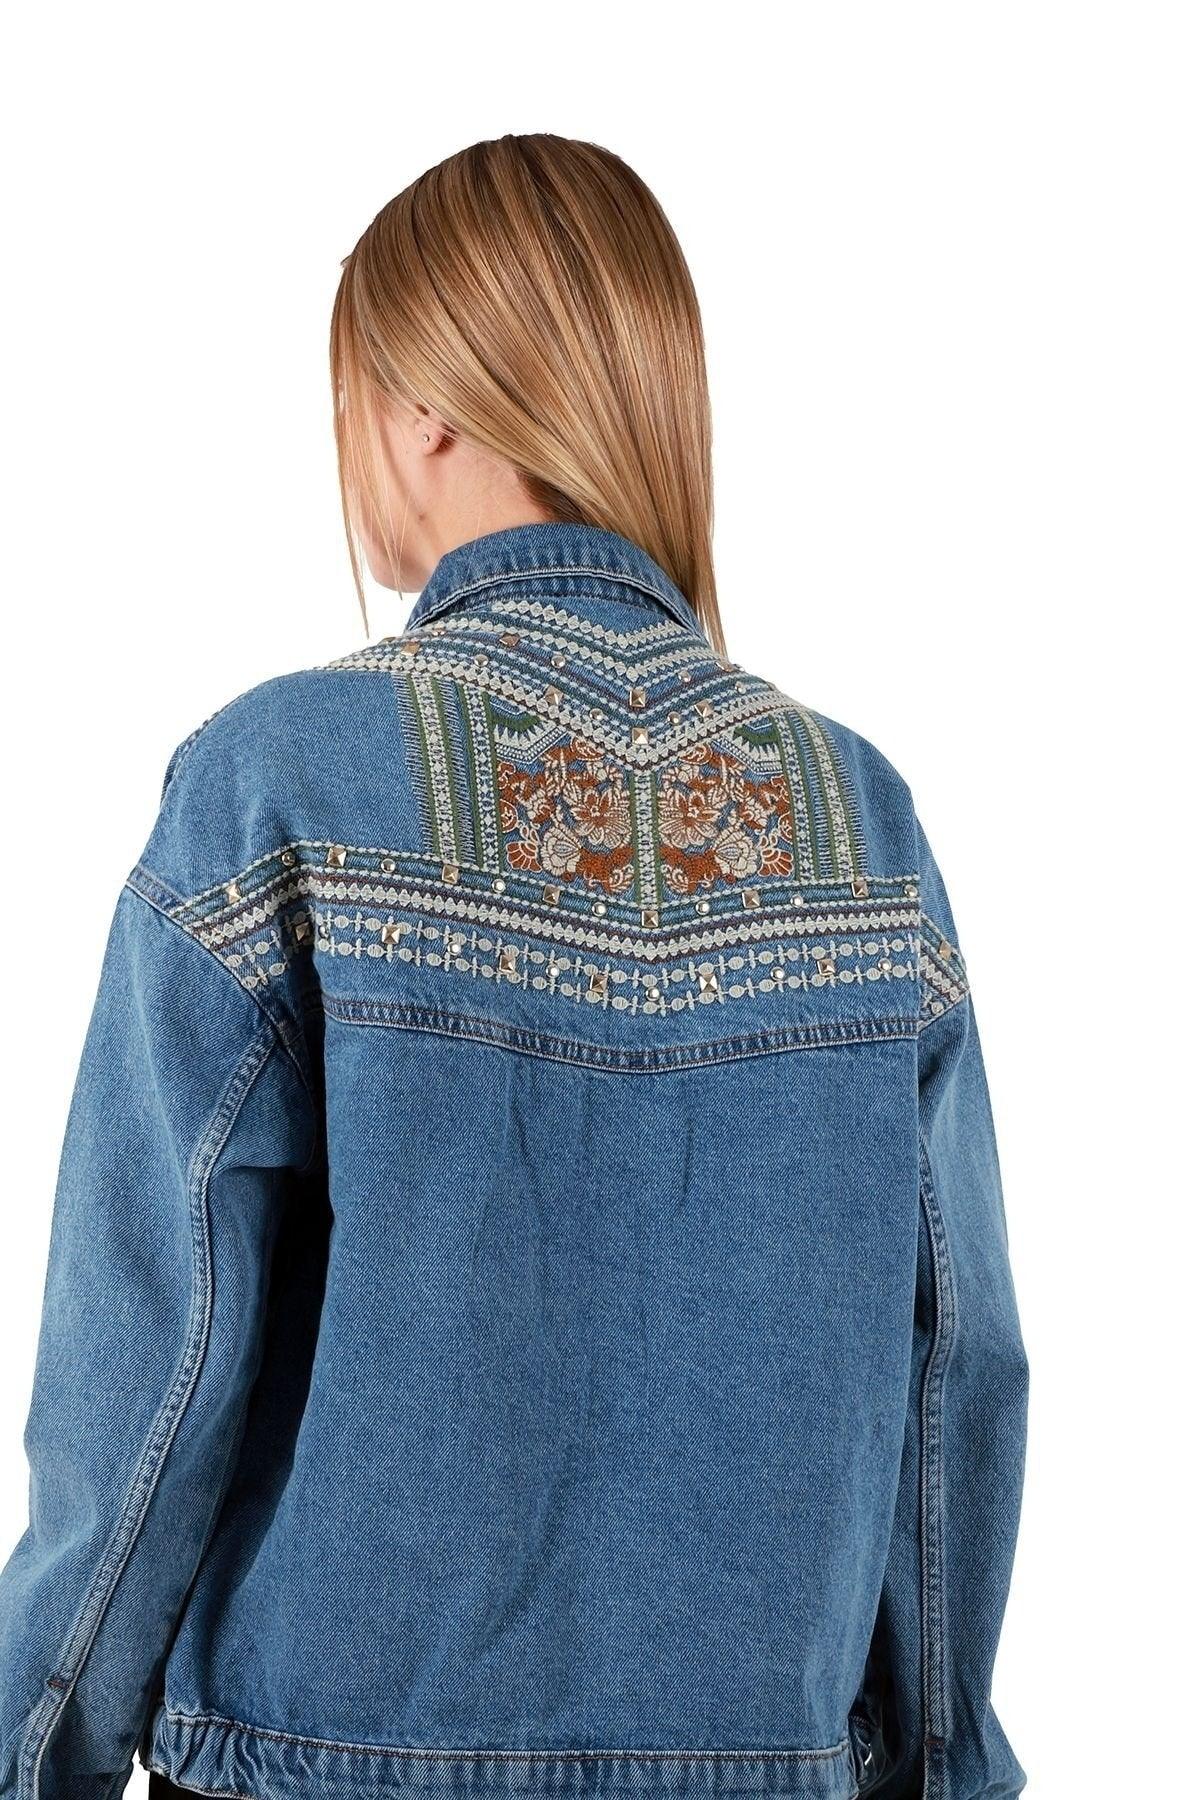 Back Embroidered Long Sleeve And Pockets Classic Collar Oversize Jeans Women's Jacket Cotton - Swordslife